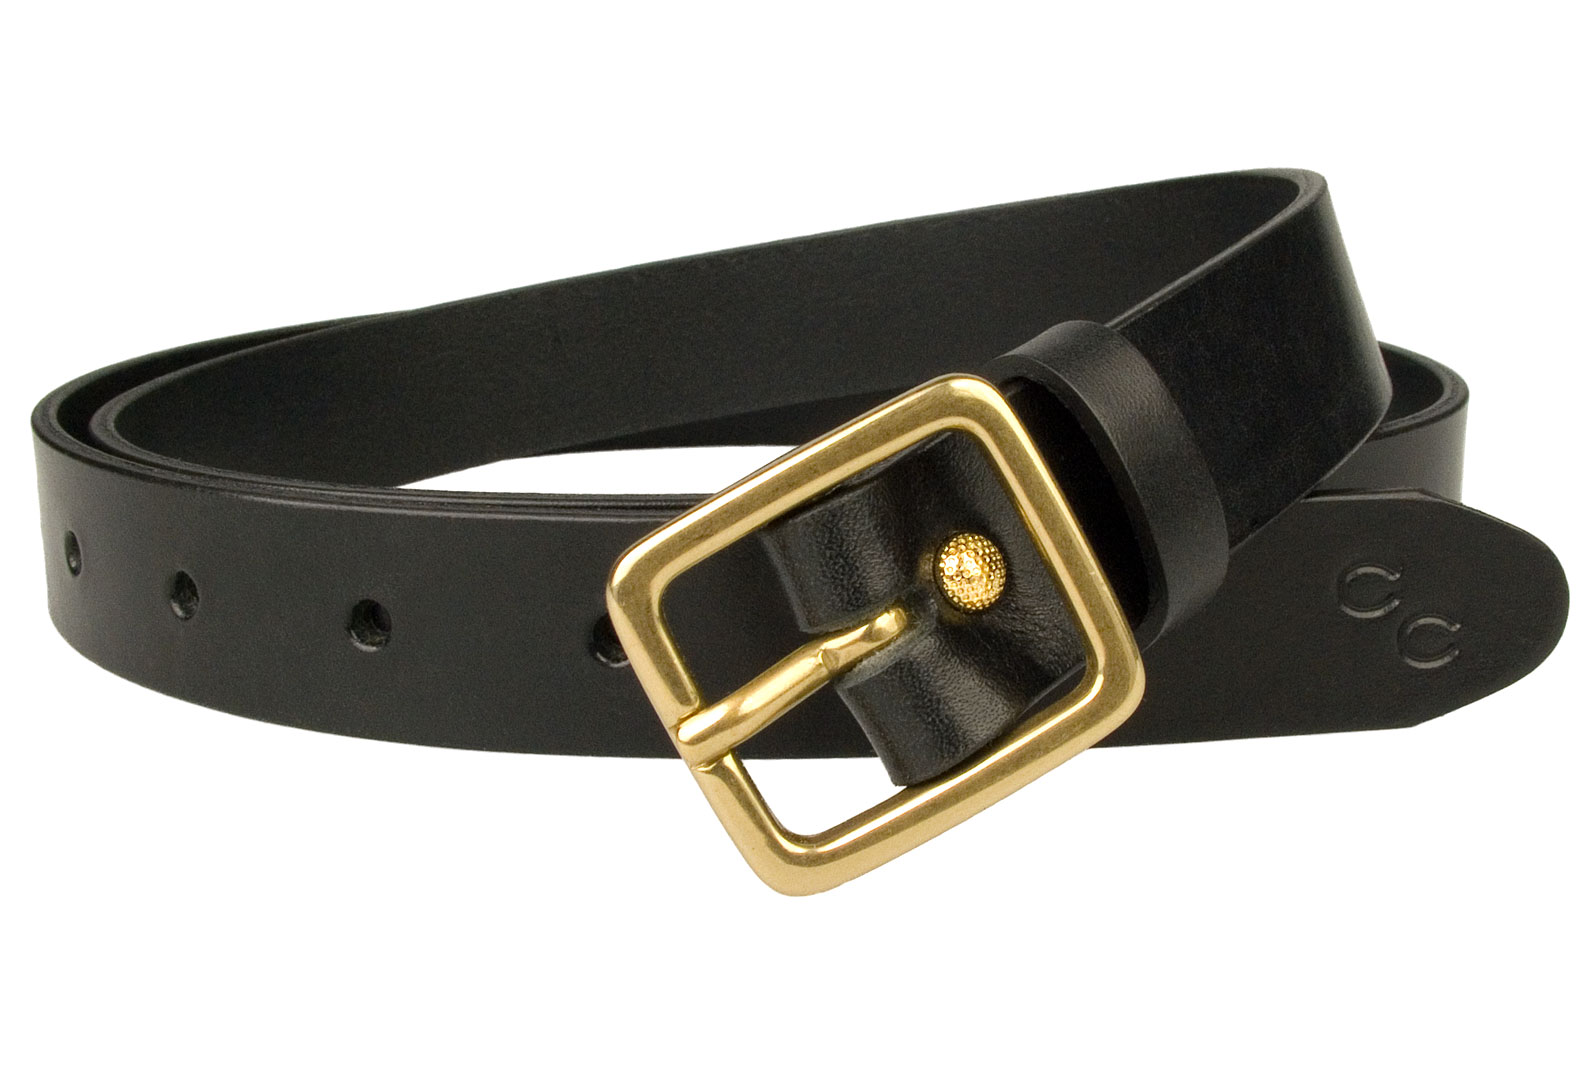 https://championchase.com/wp-content/uploads/2019/09/Womens-Narrow-Black-Leather-Belt-Solid-Brass-Buckle-Made-In-UK.jpg